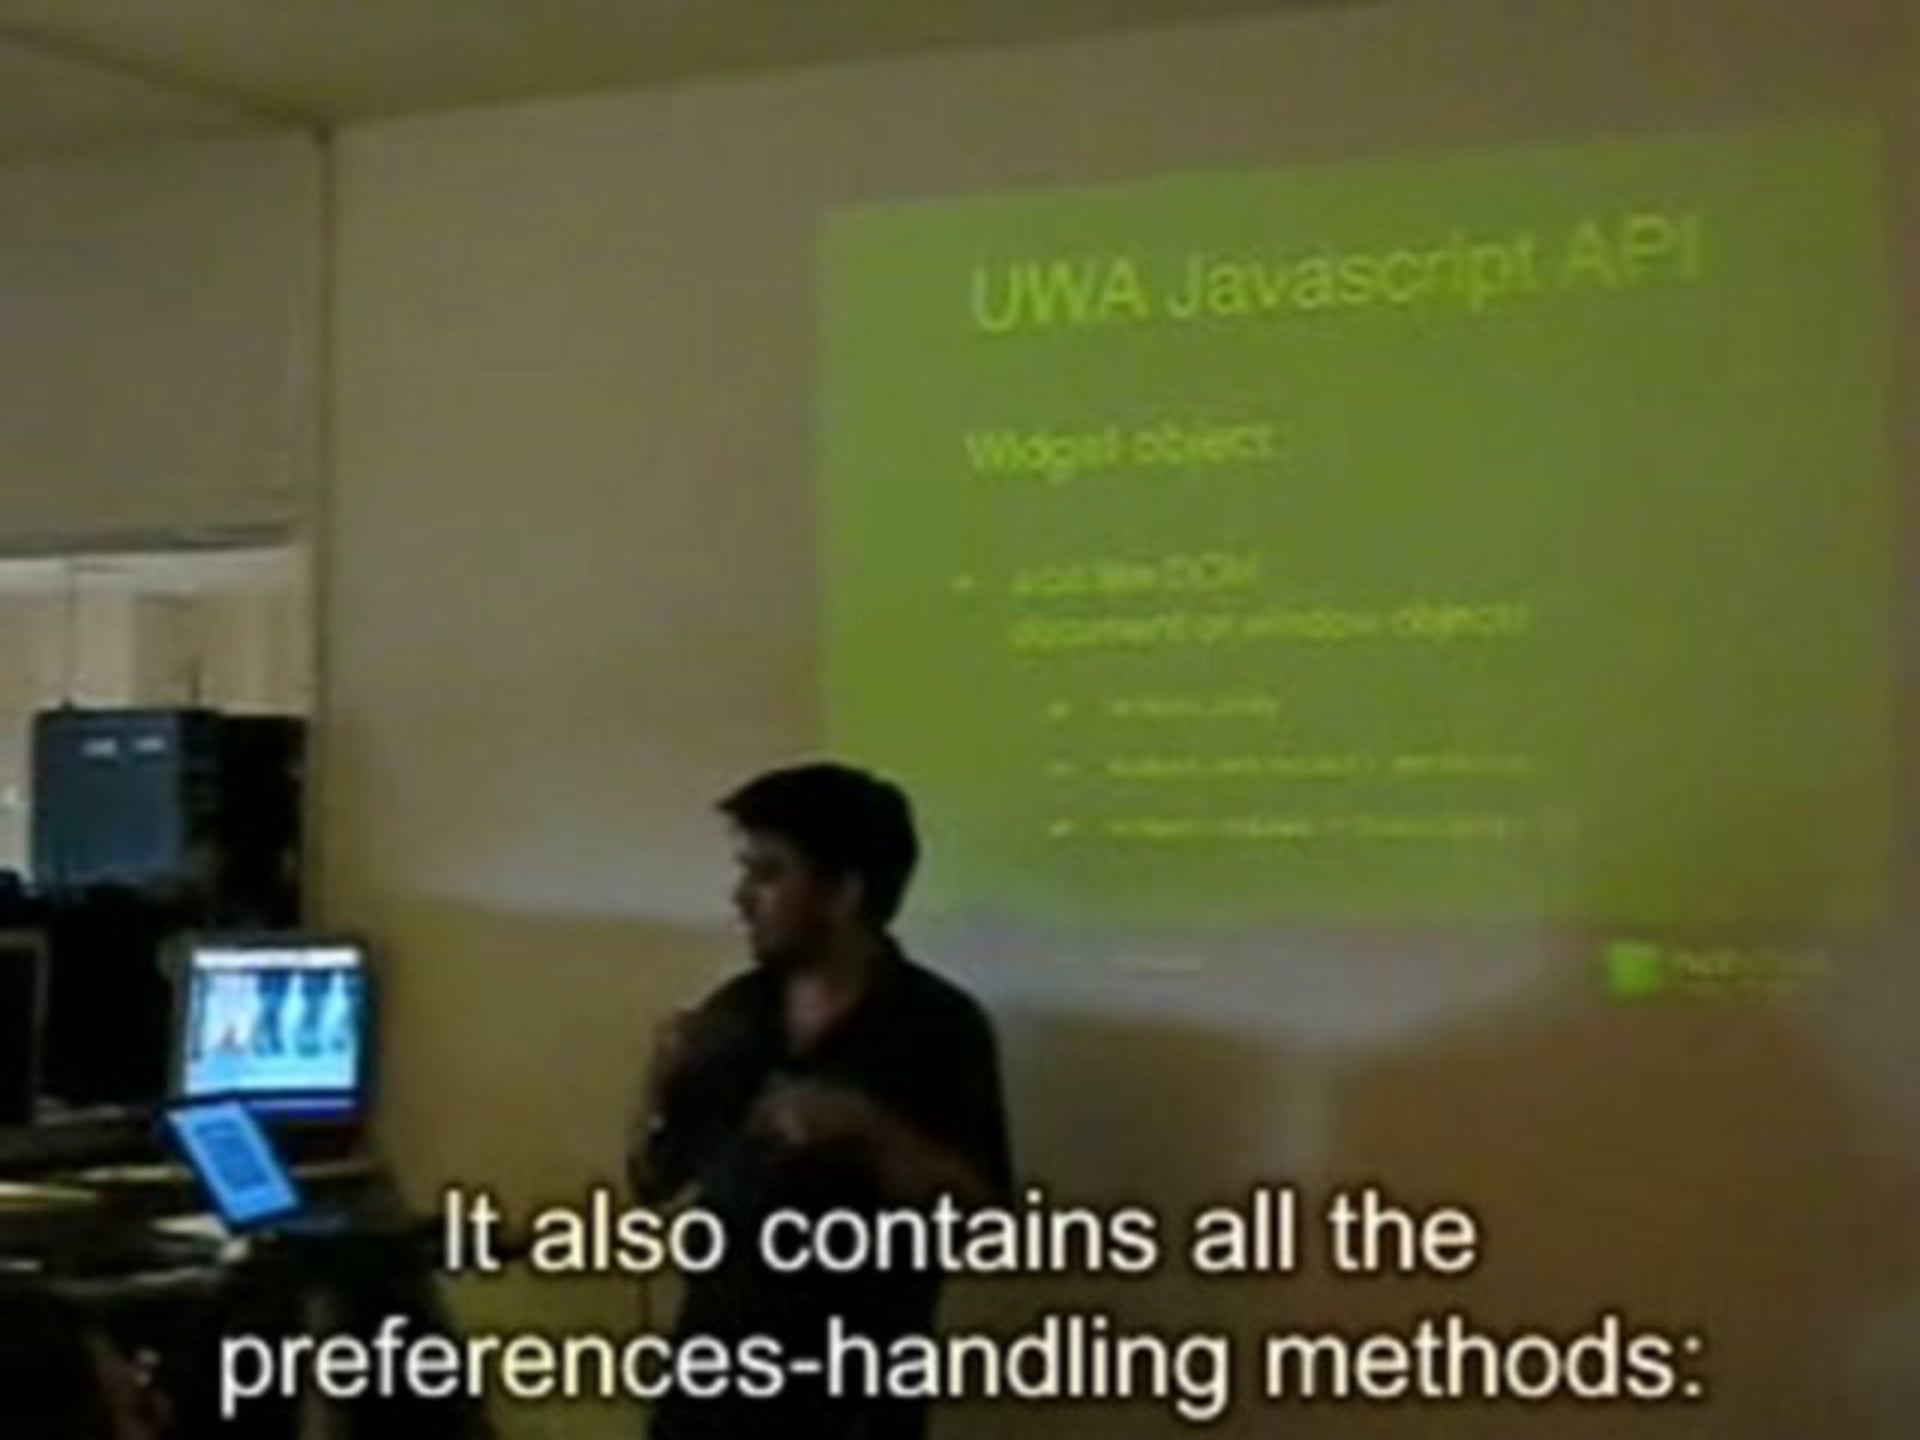 Netvibes Developers Meetup: UWA, APIs and Open-Source projects from Netvibes.org